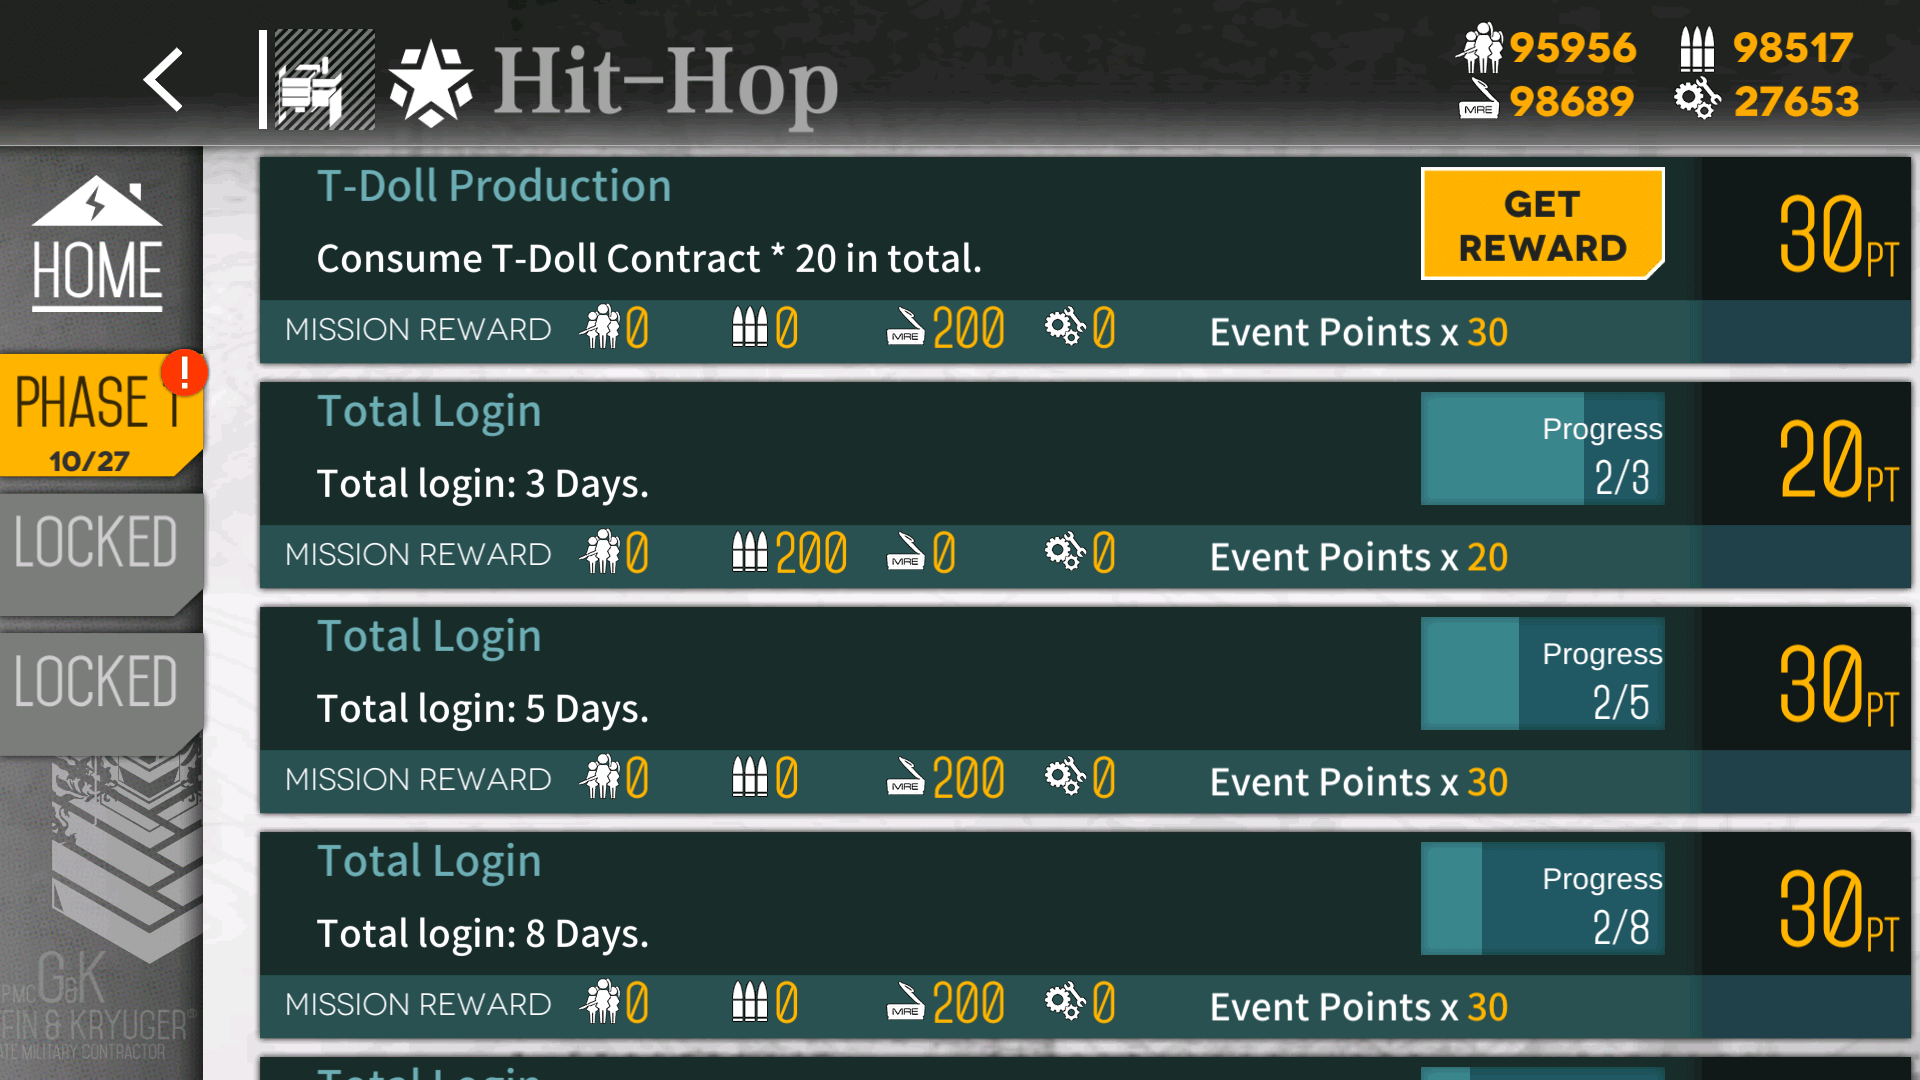 "Hit-Hop" PM-9 point event quests screen